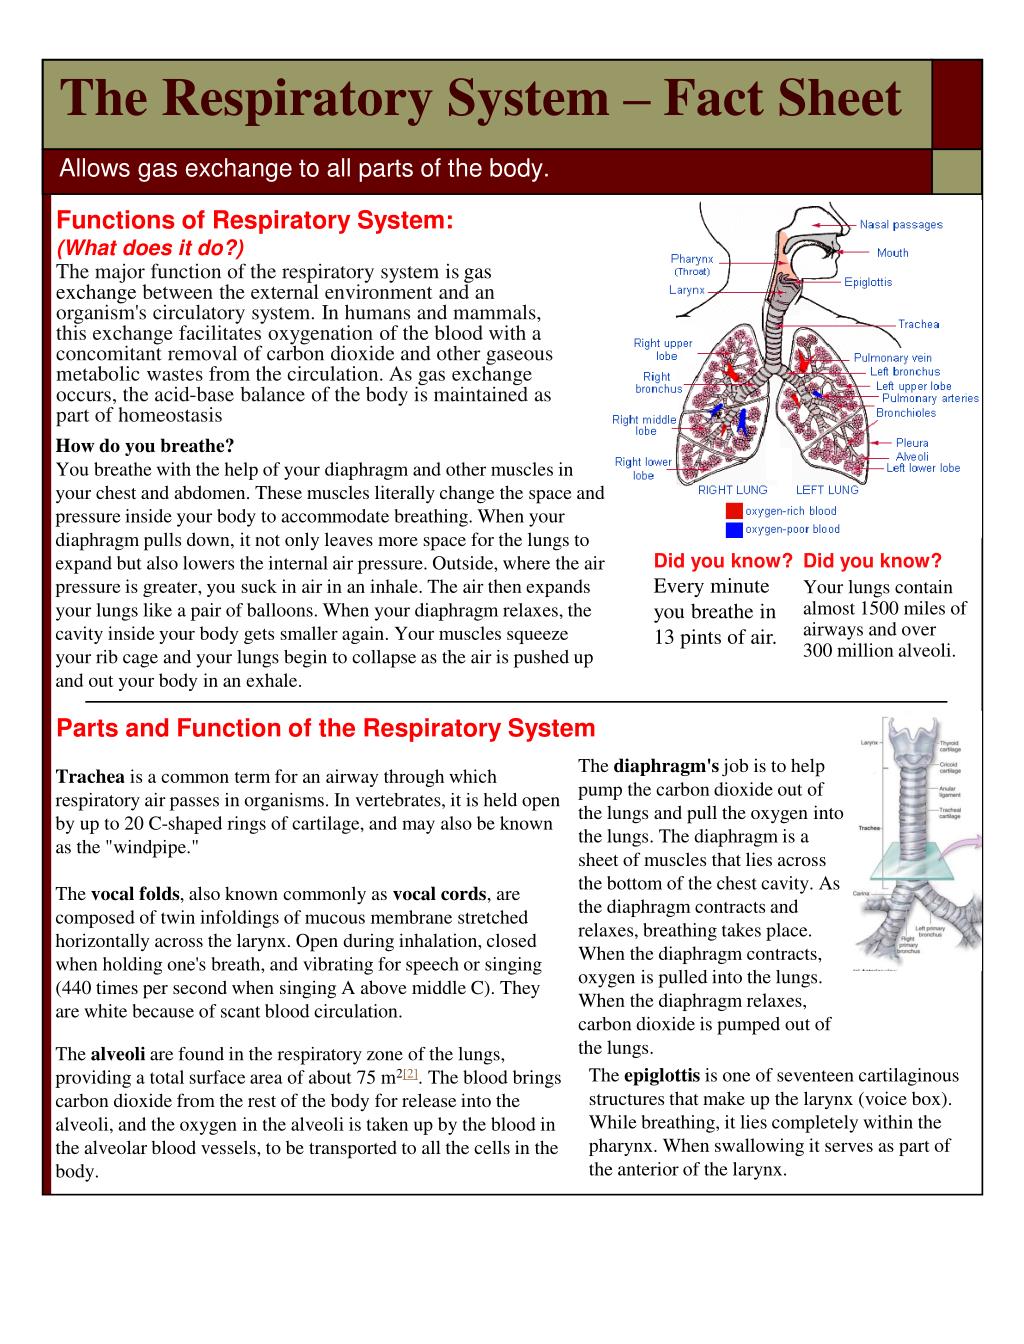 Ppt The Respiratory System Fact Sheet Powerpoint Presentation Free